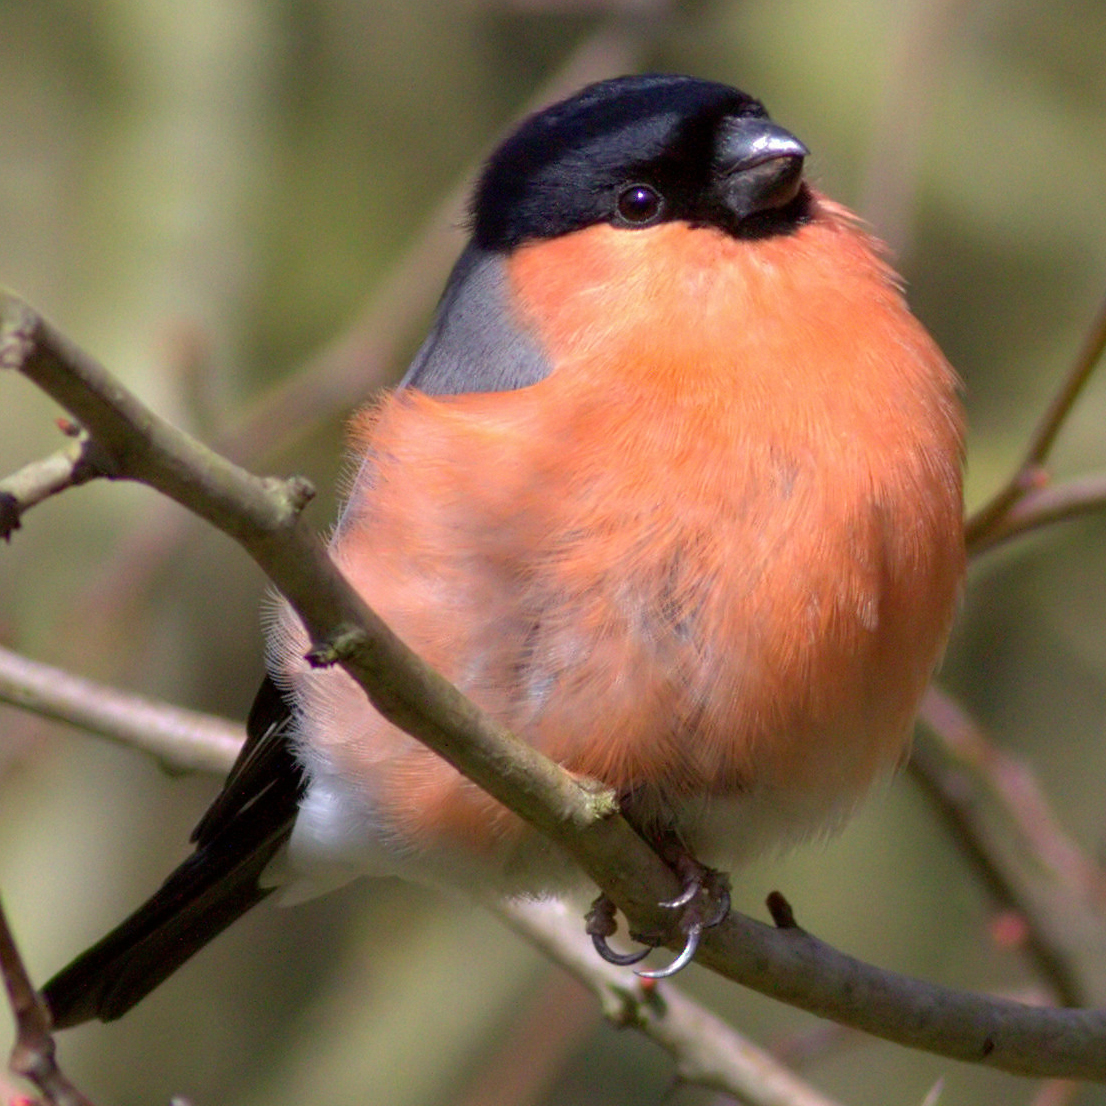 a bullfinch perched on a thin branch